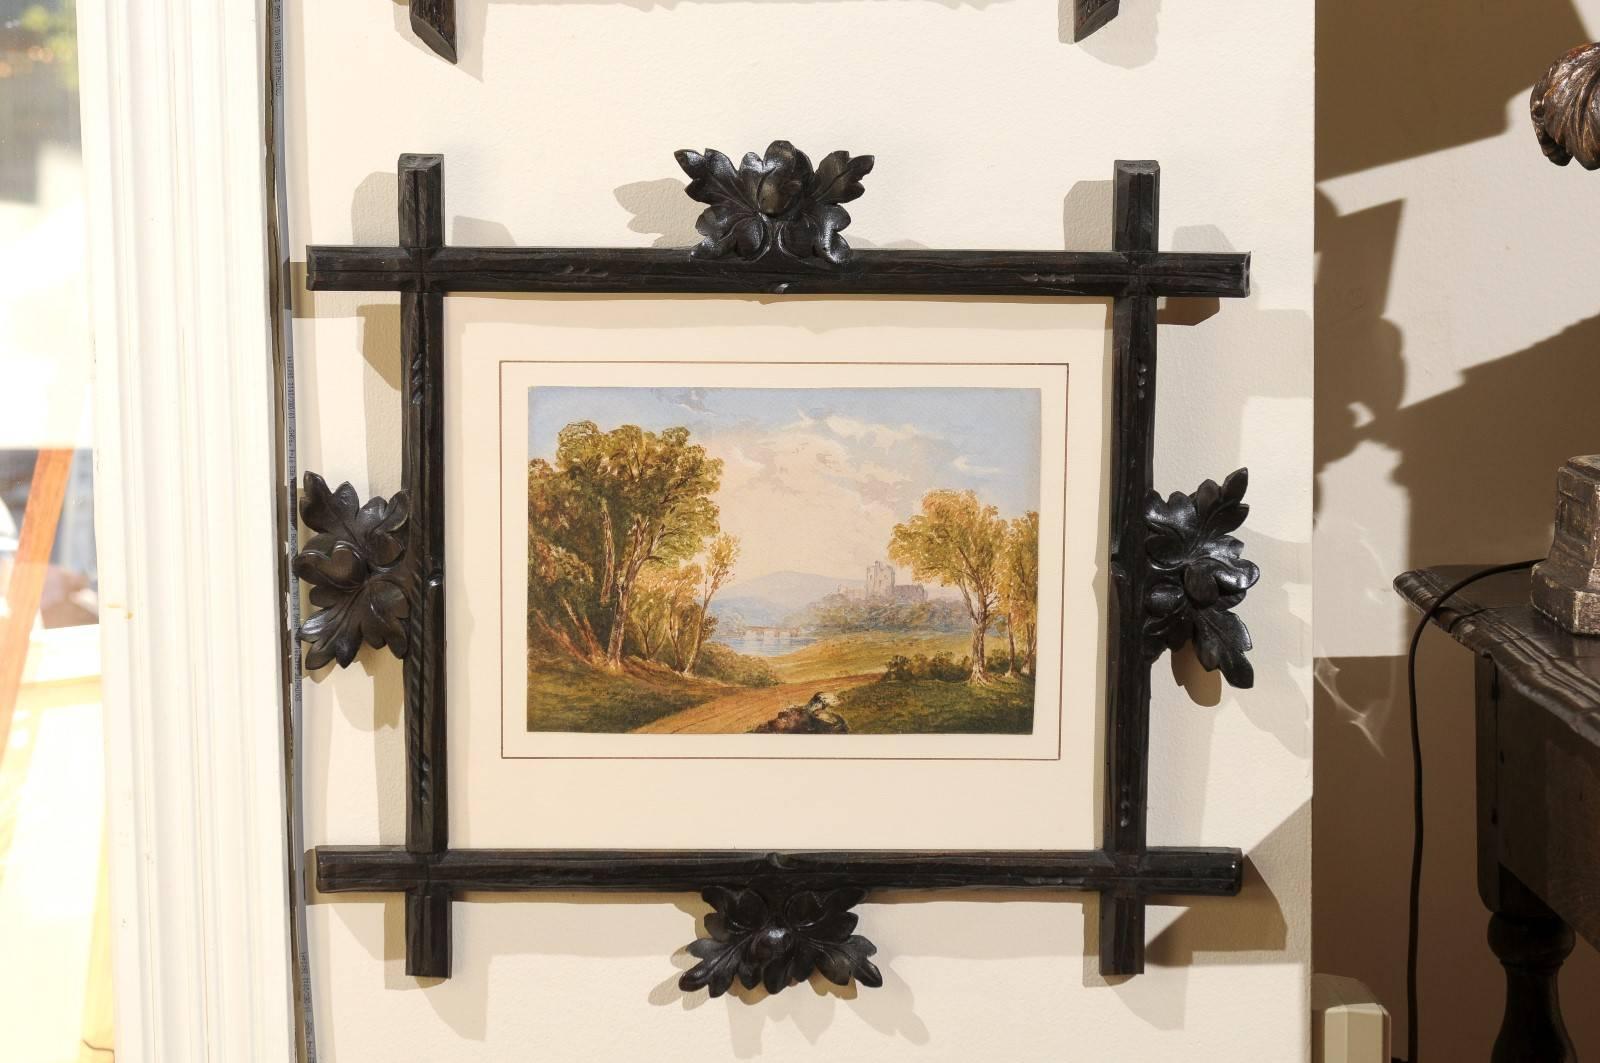 This is a scene from the English Country side. The scene is enhanced by French matting inside a wonderful antique carved black forest frame.